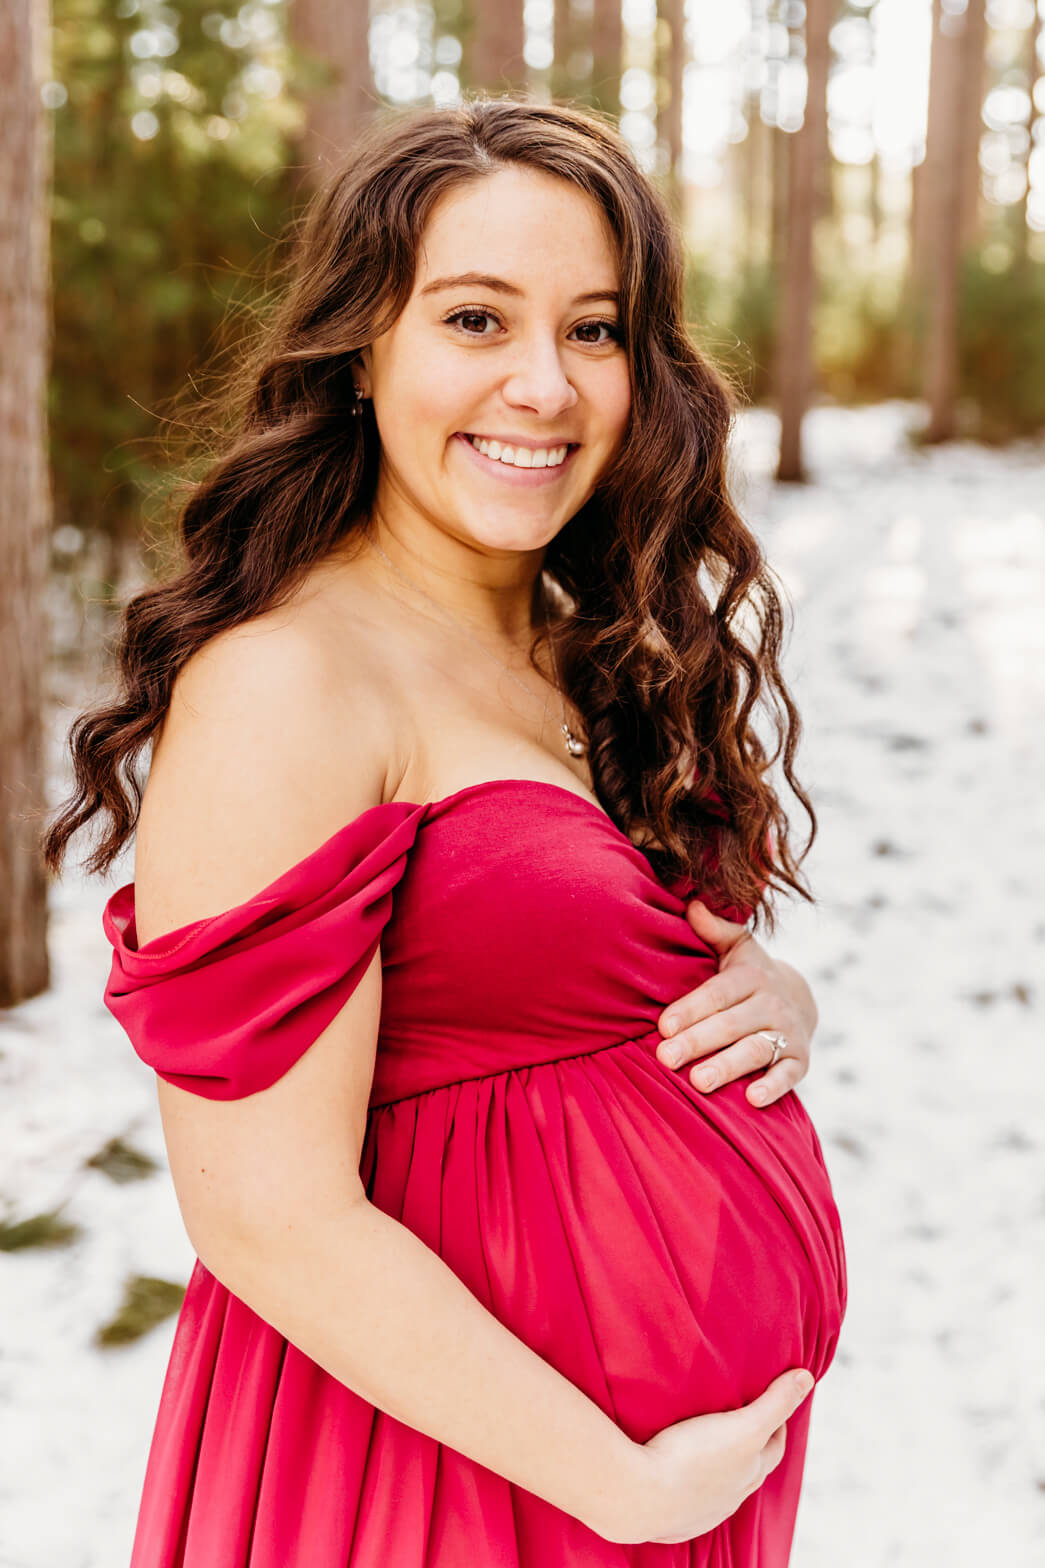 A mother to be holds her bump in a pink maternity gown while standing in a snowy forest